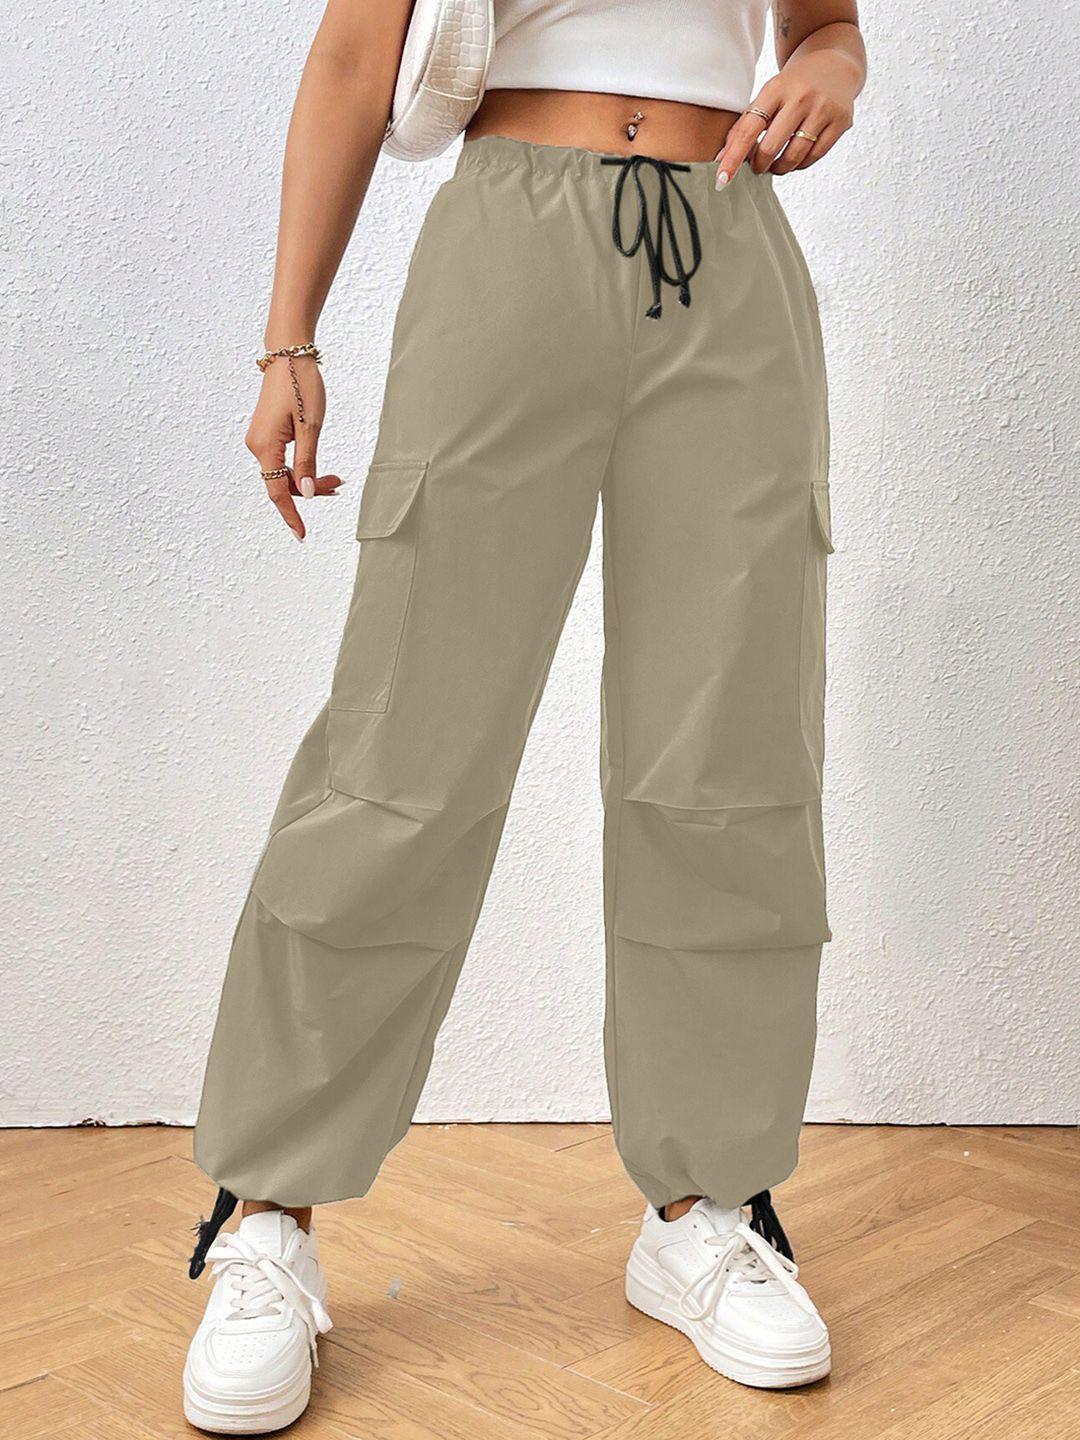 aahwan-women-loose-fit-high-rise-drawstring-cotton-cargos-trousers